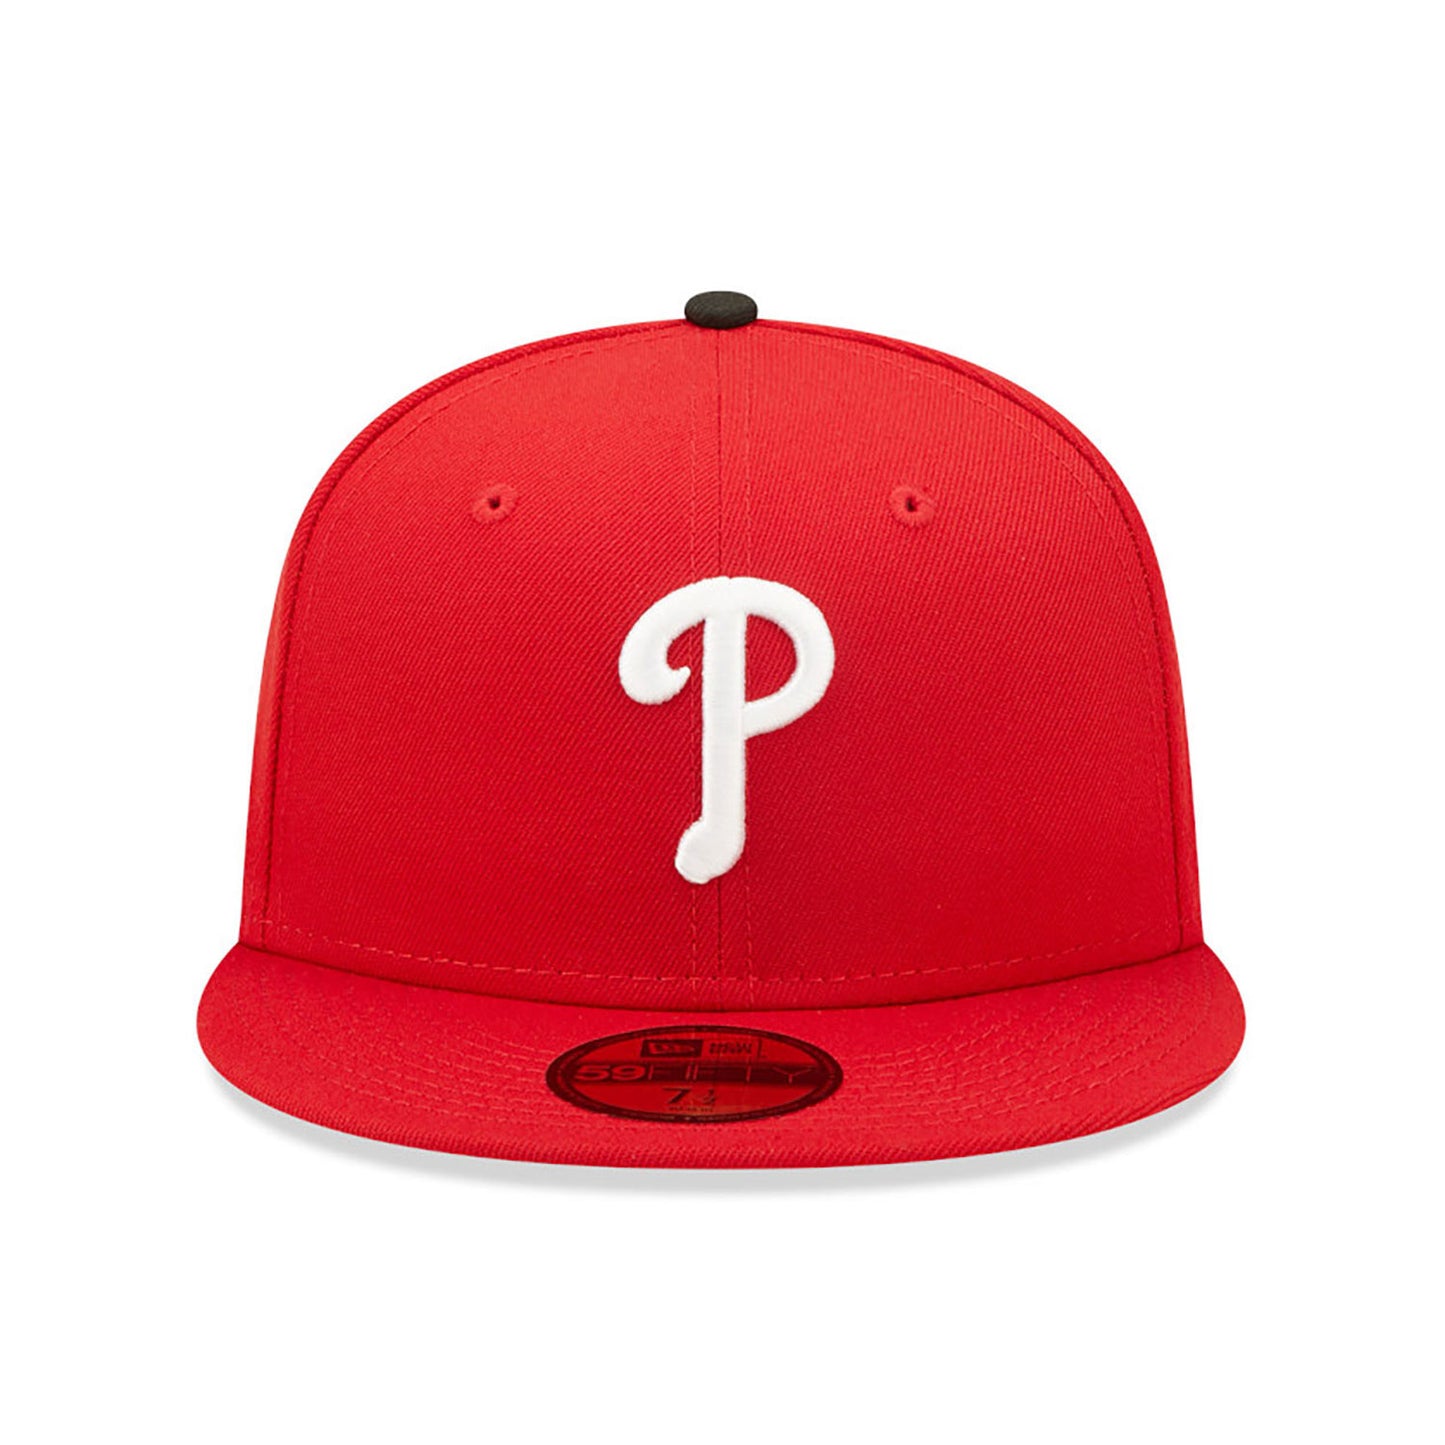 NEW ERA Philadelphia Phillies Authentic On Field Red 59FIFTY Fitted Cap